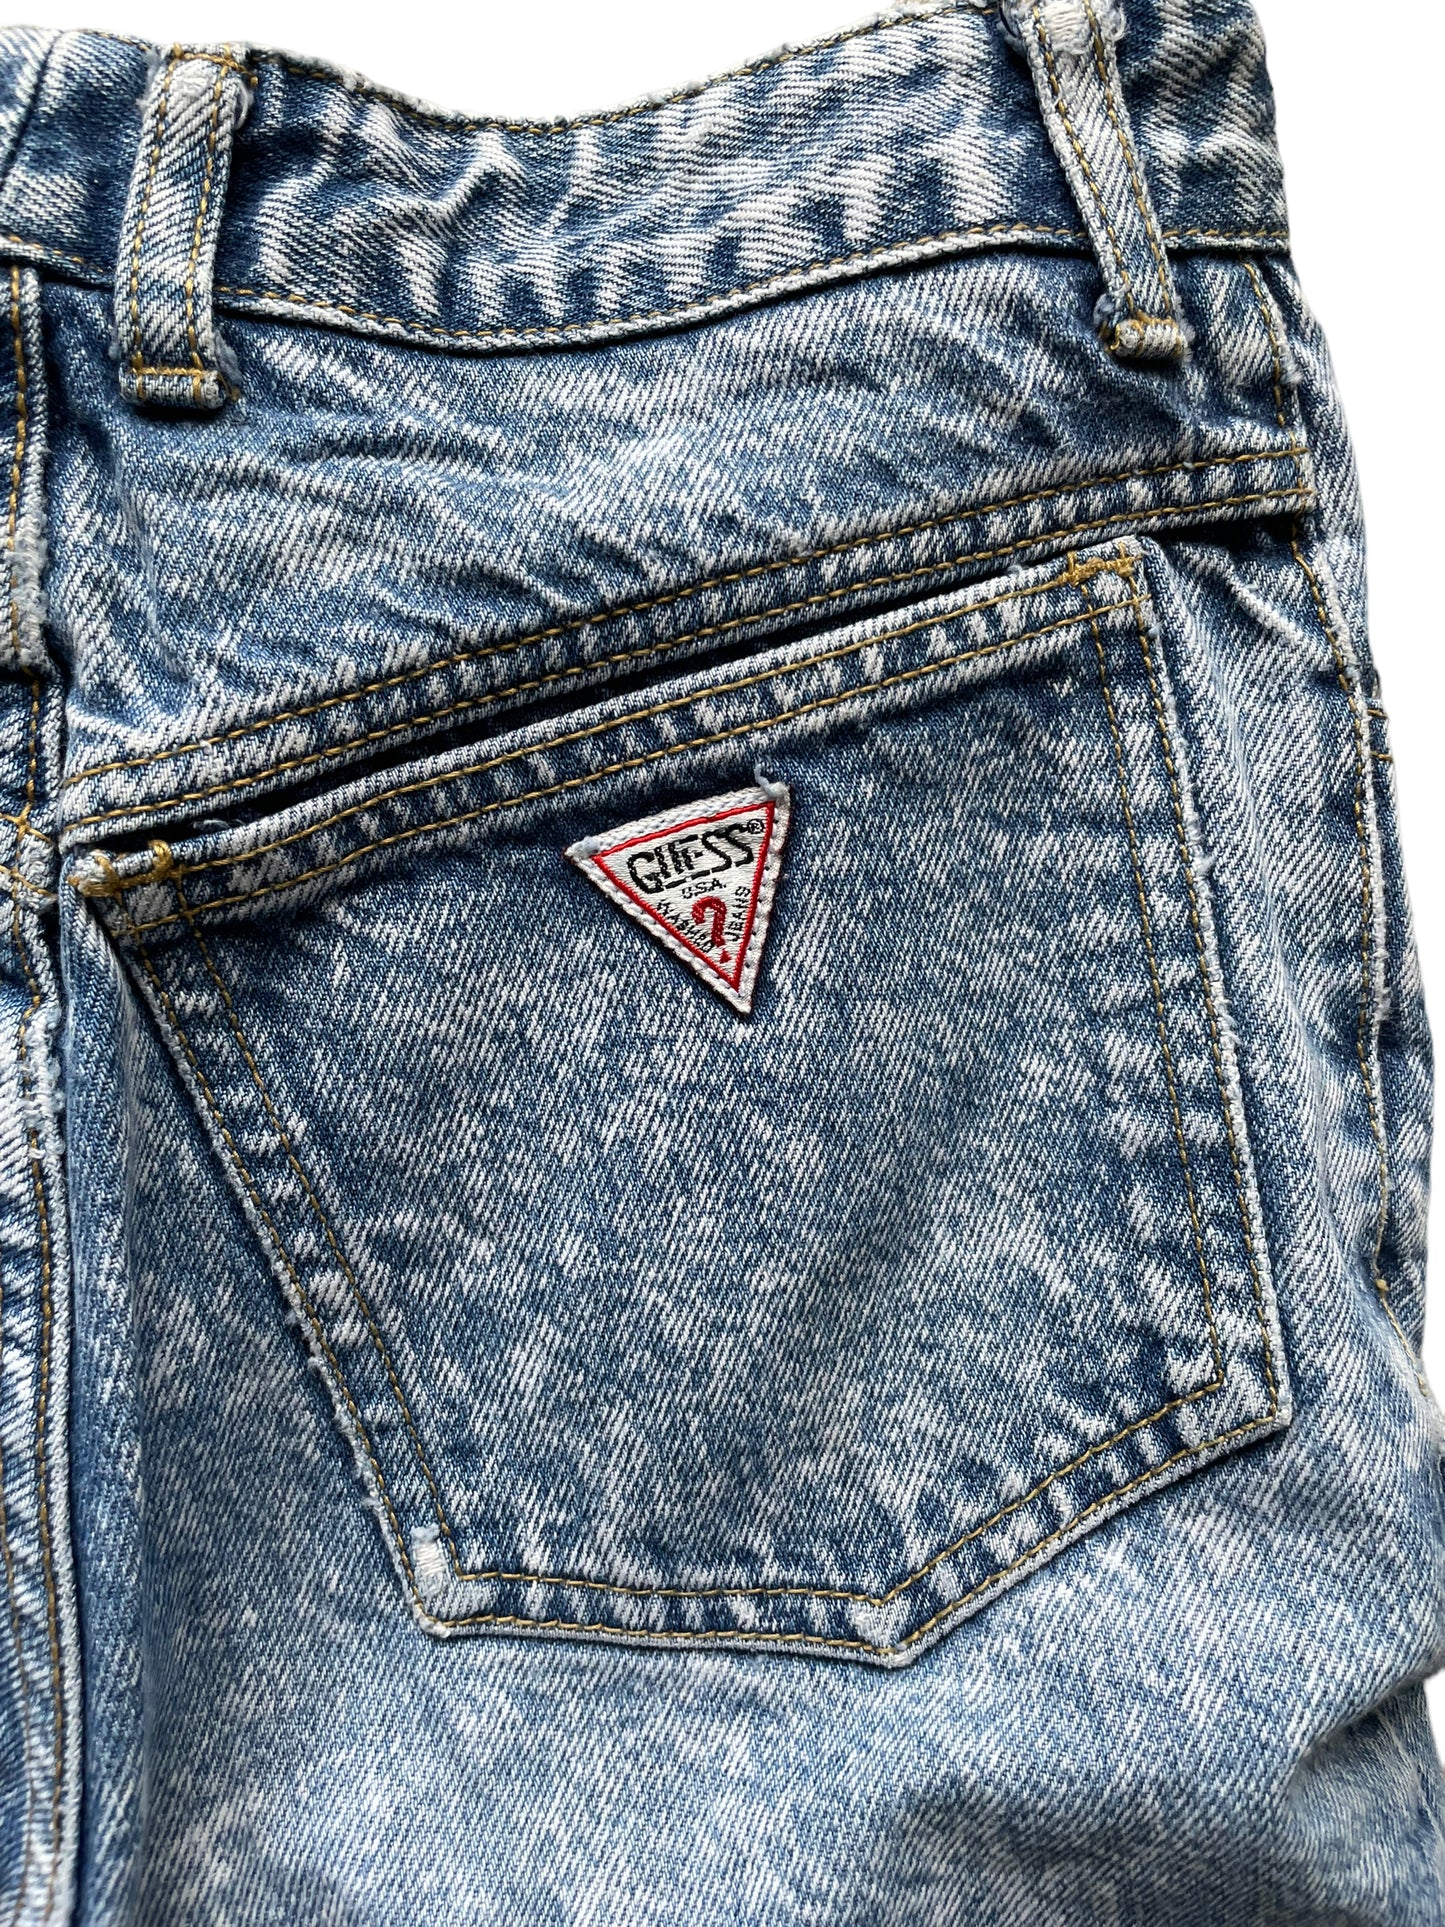 Pocket tag view of Vintage 80s Ankle Zip Acid Wash Guess Jeans